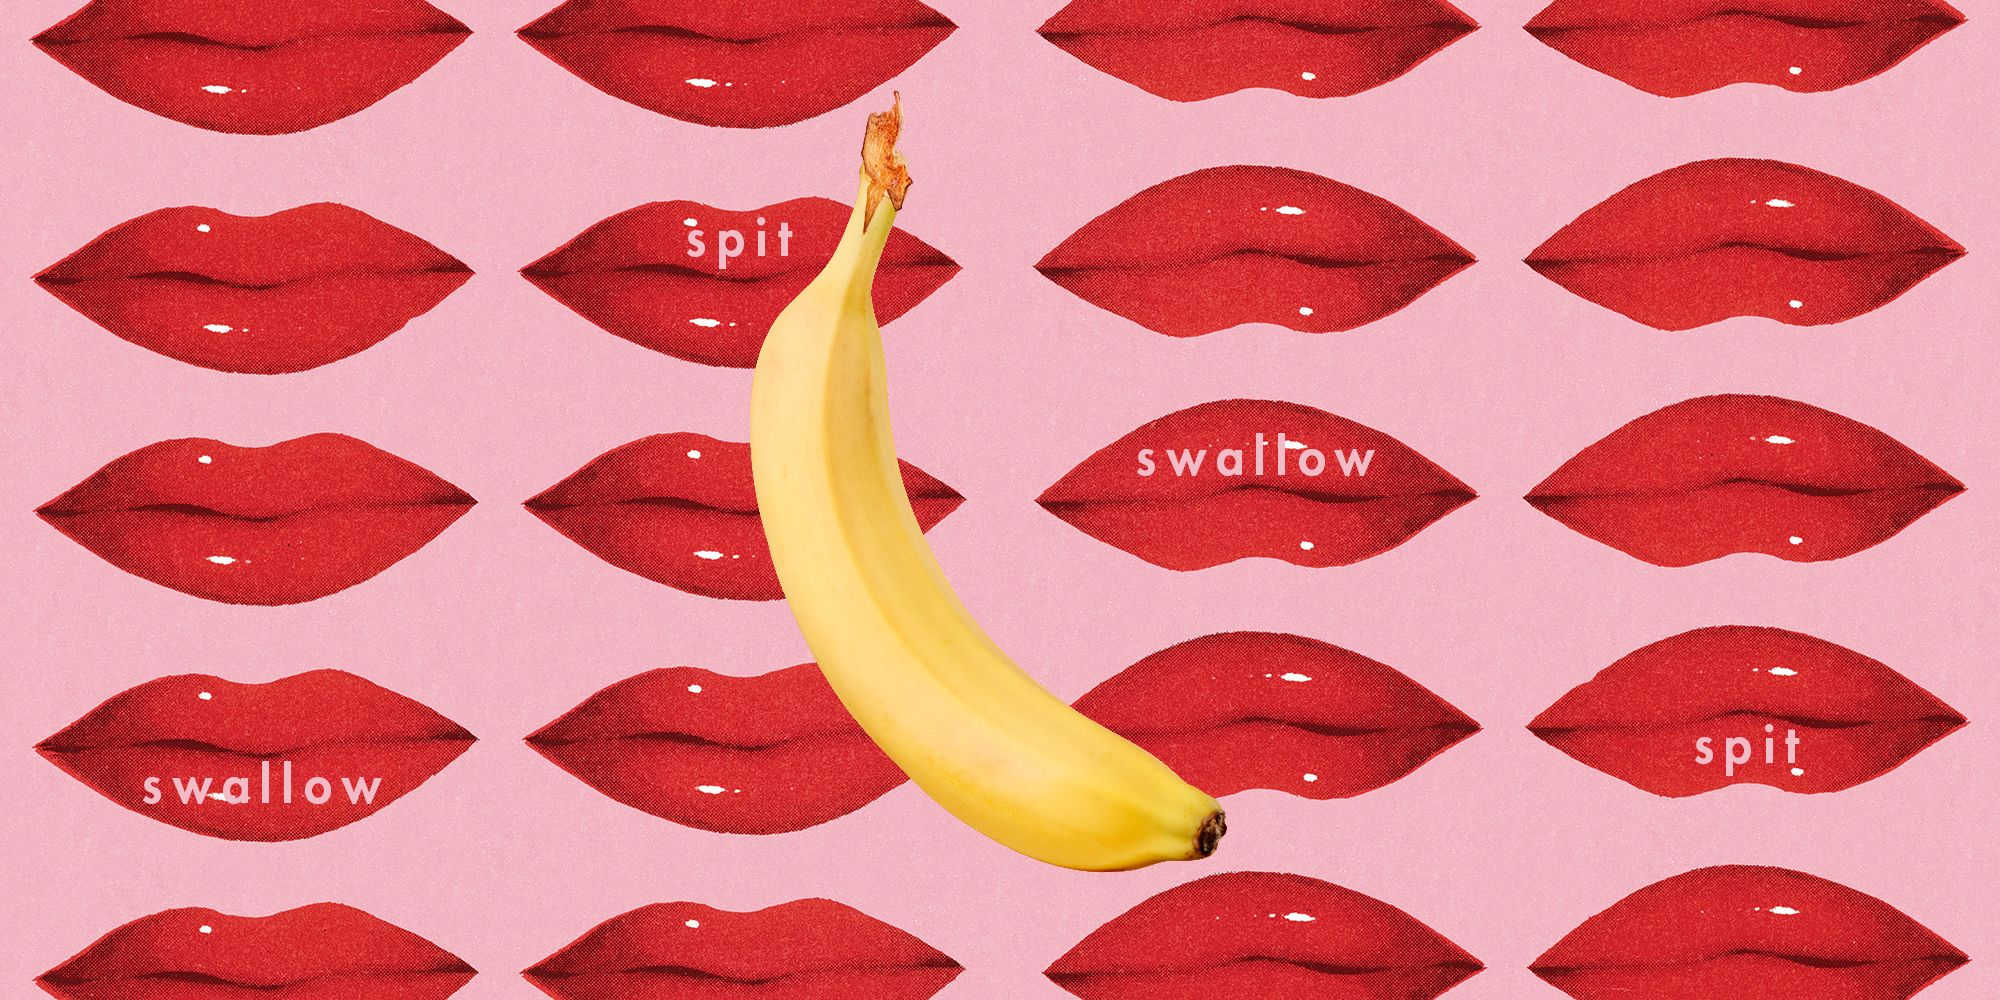 Spit or Swallow picture